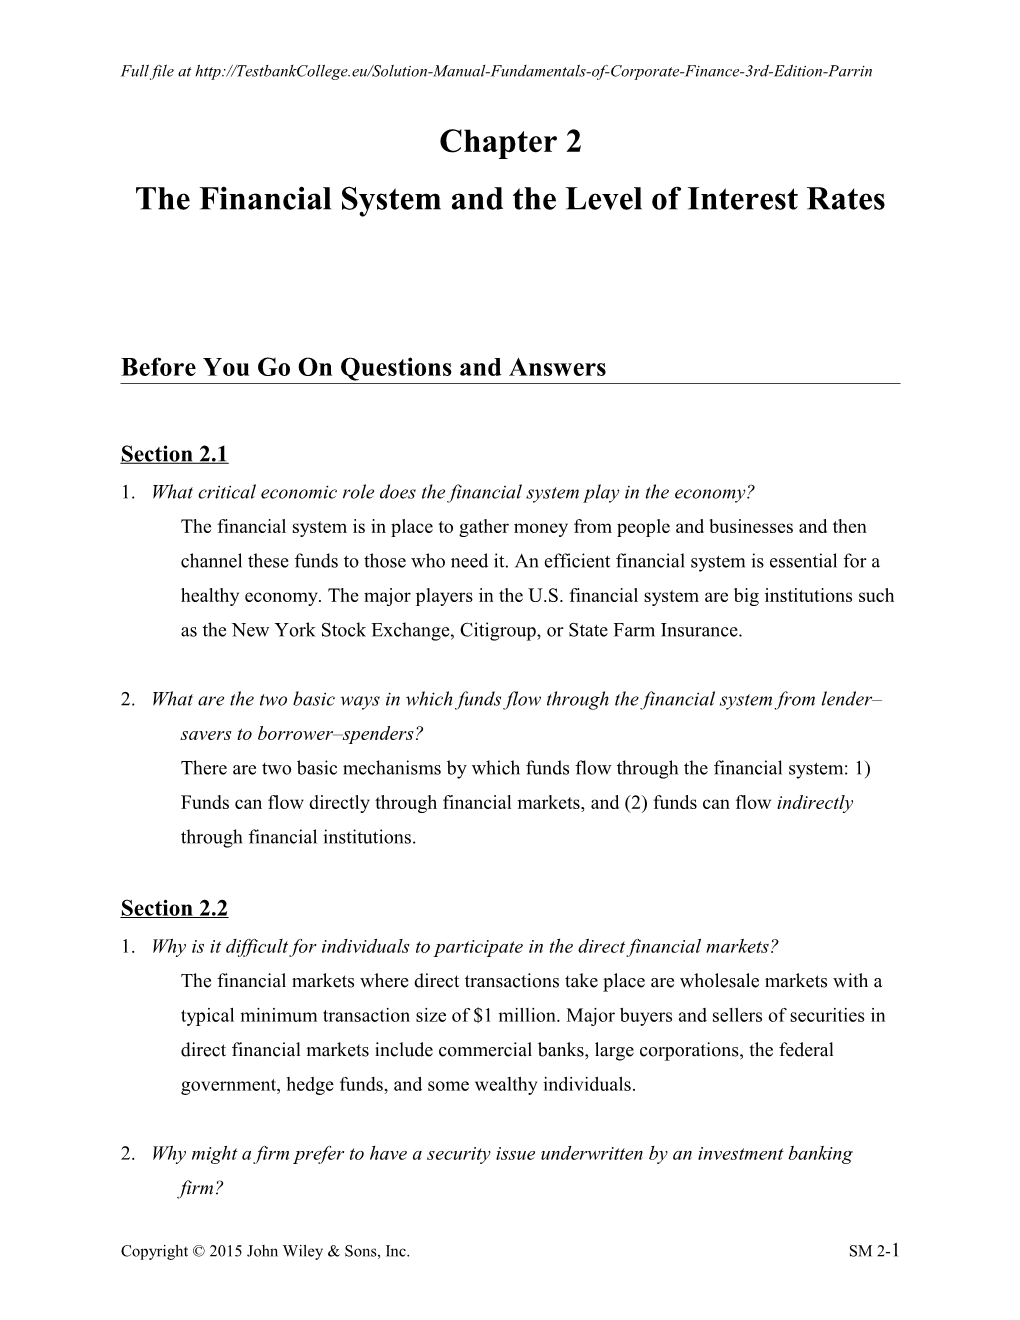 The Financial System and the Level of Interest Rates